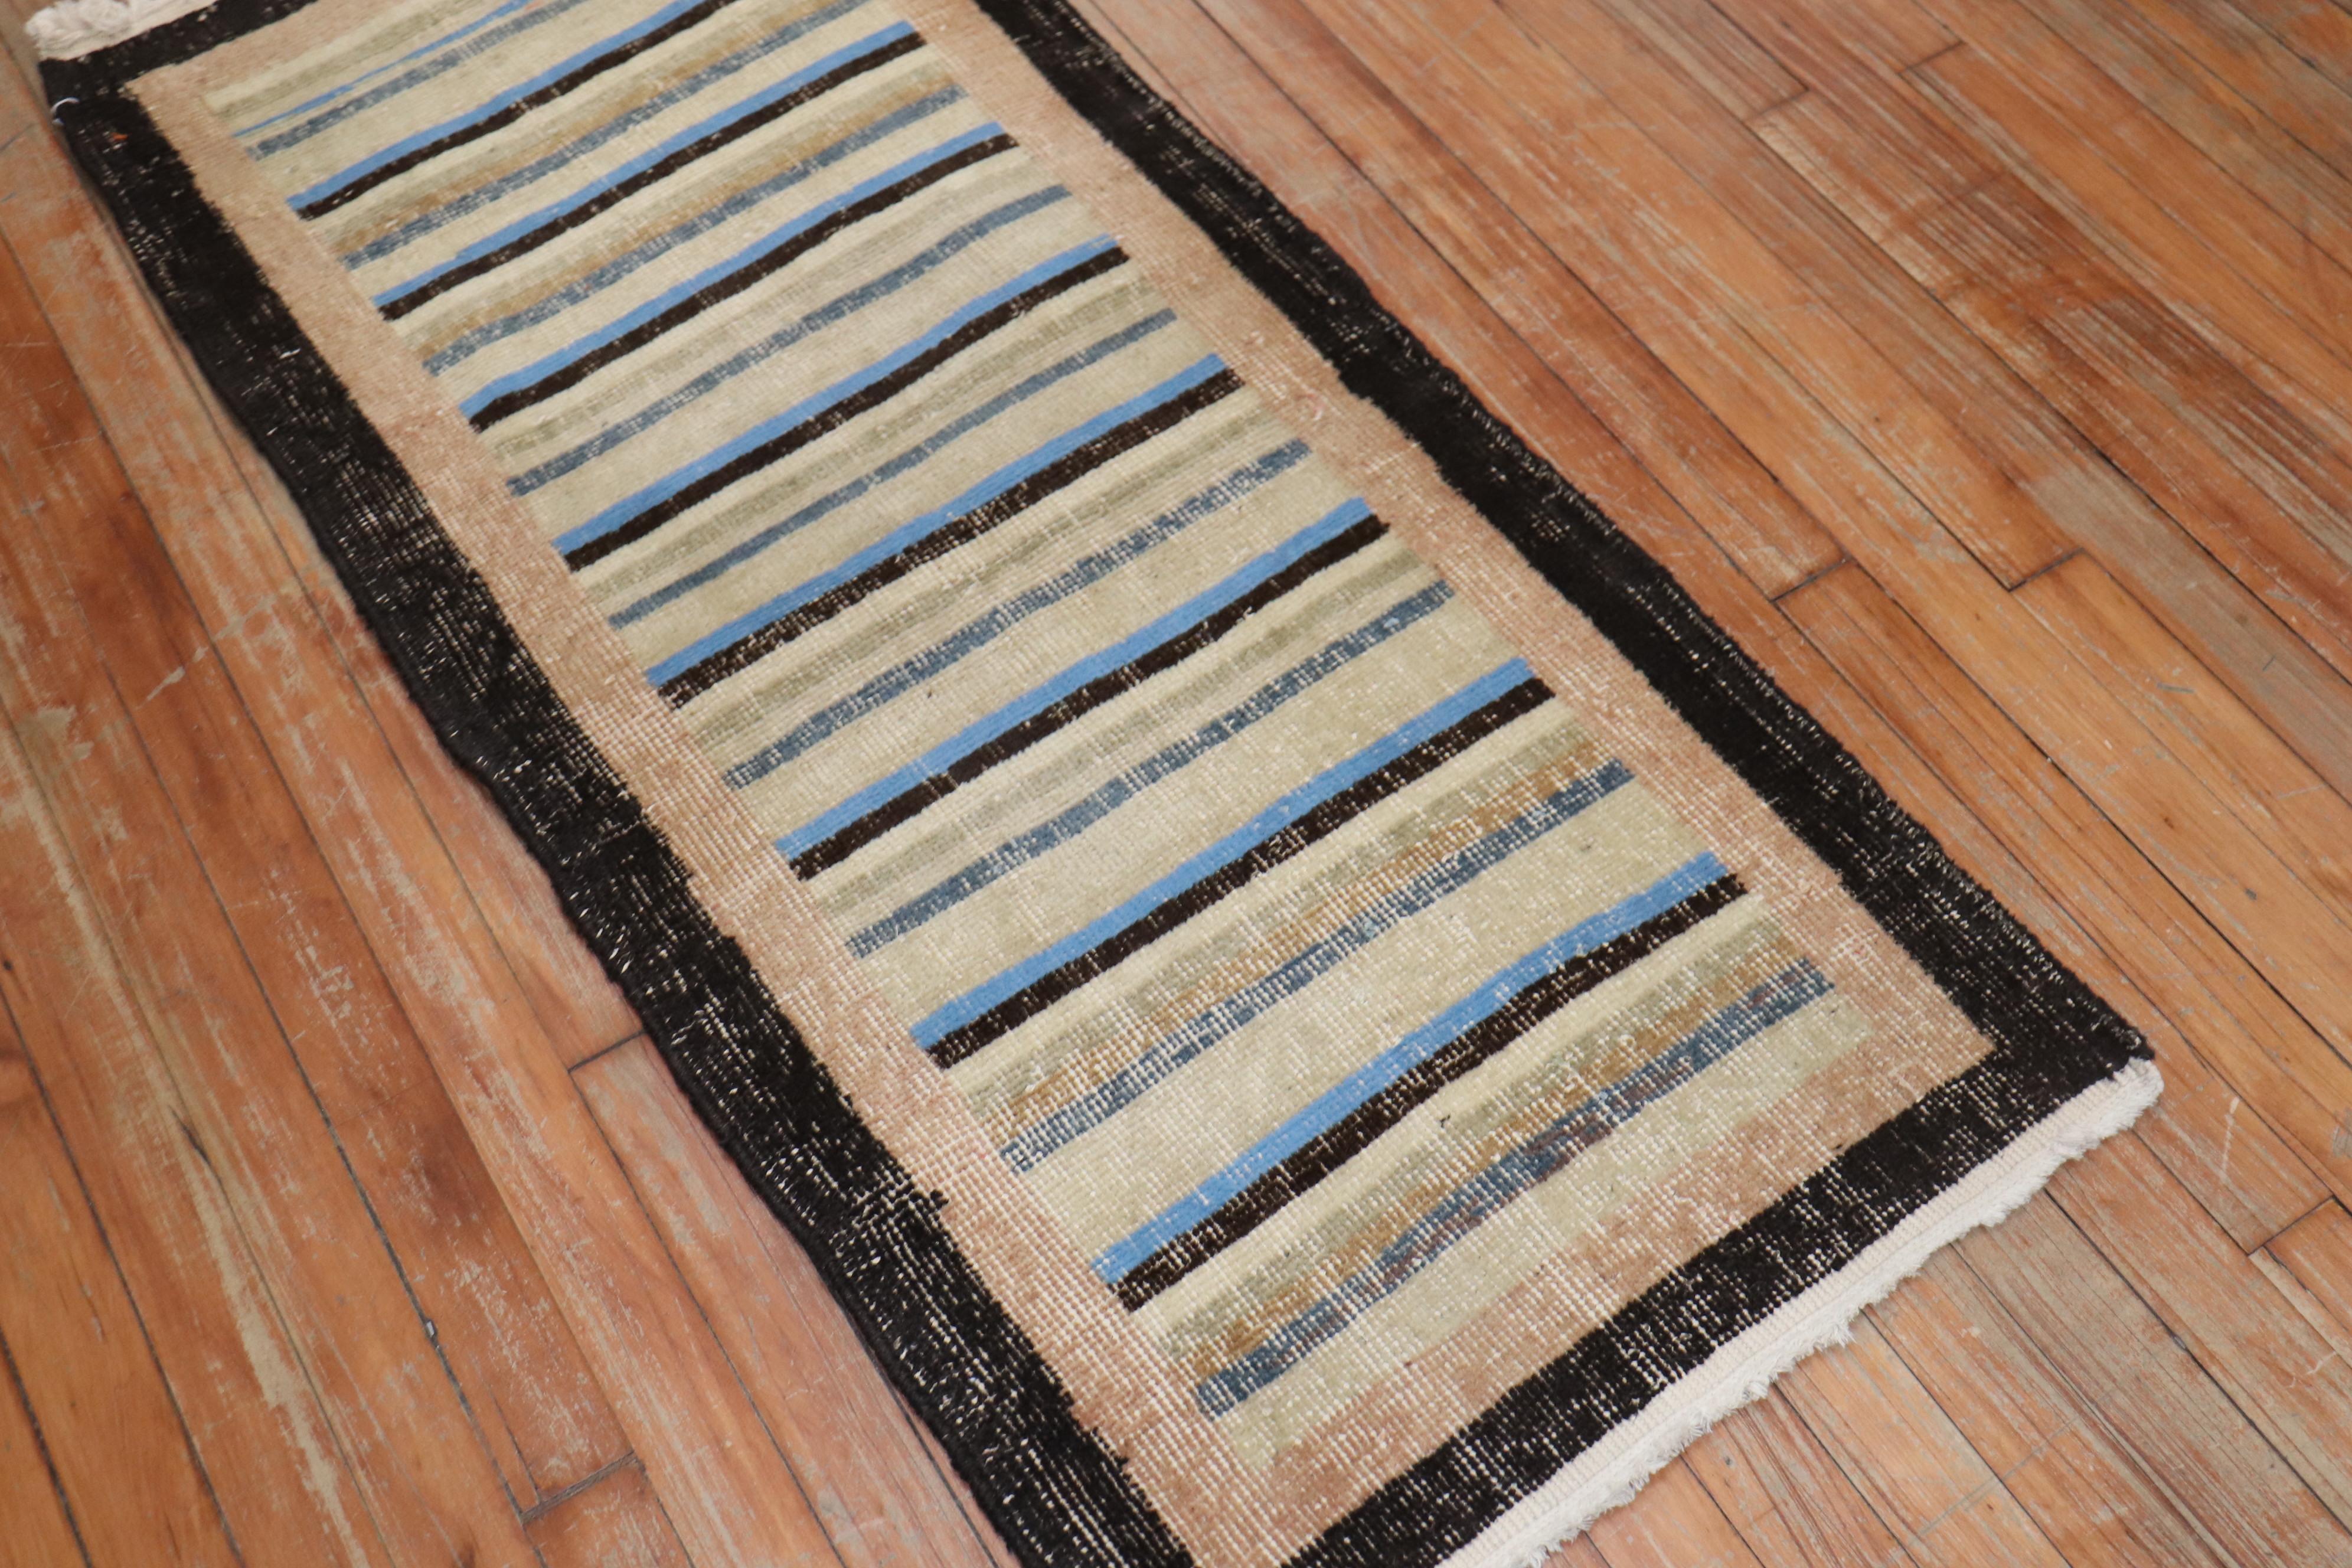 Midcentury one of a kind Turkish Anatolian deco style runner. Very slick!

Measures: 2' x 4'5